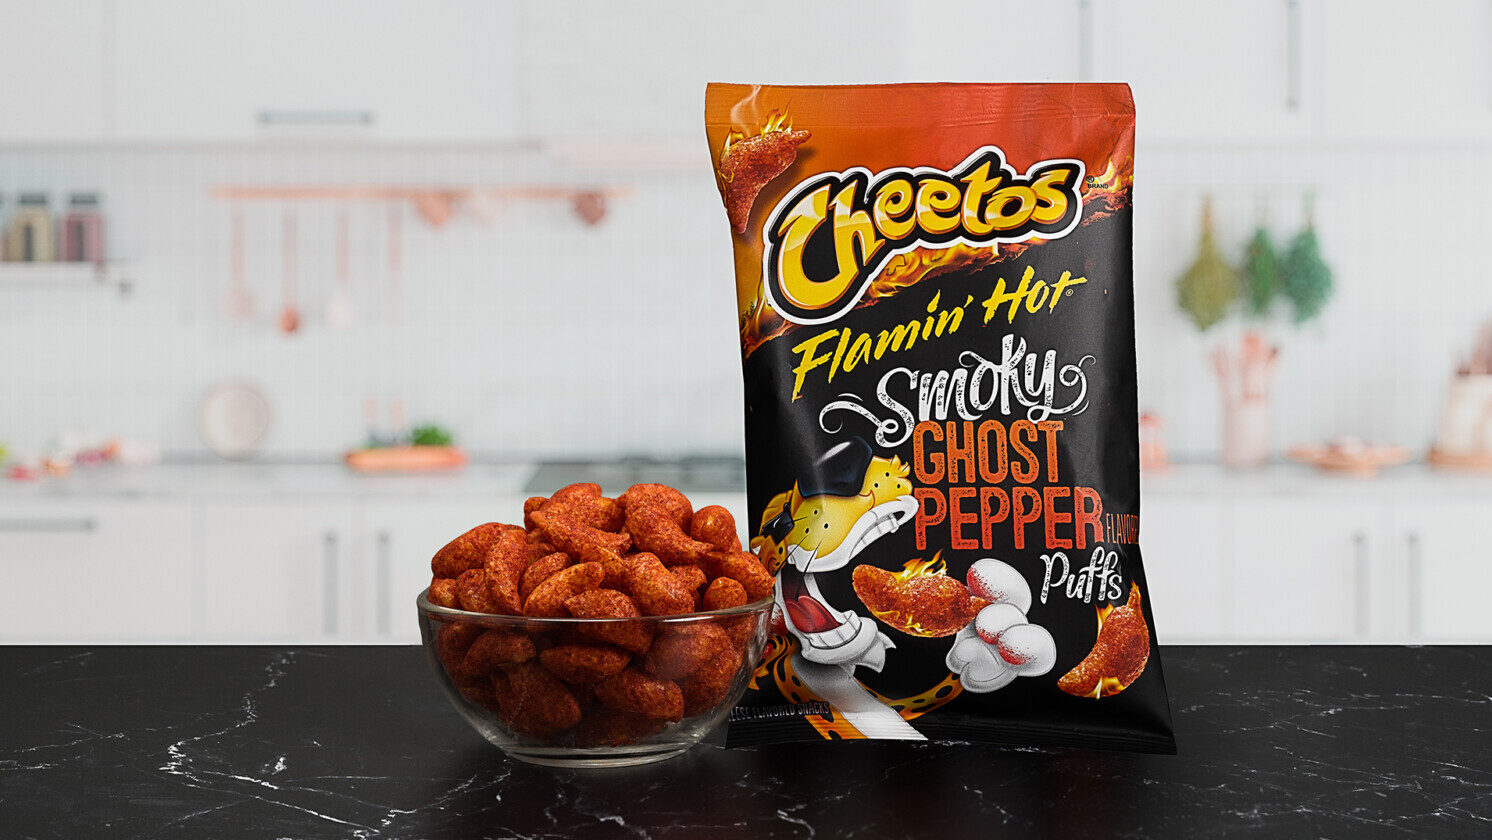 Cheetos Debuts Limited Edition Flamin Hot Puffs With Ghost Pepper